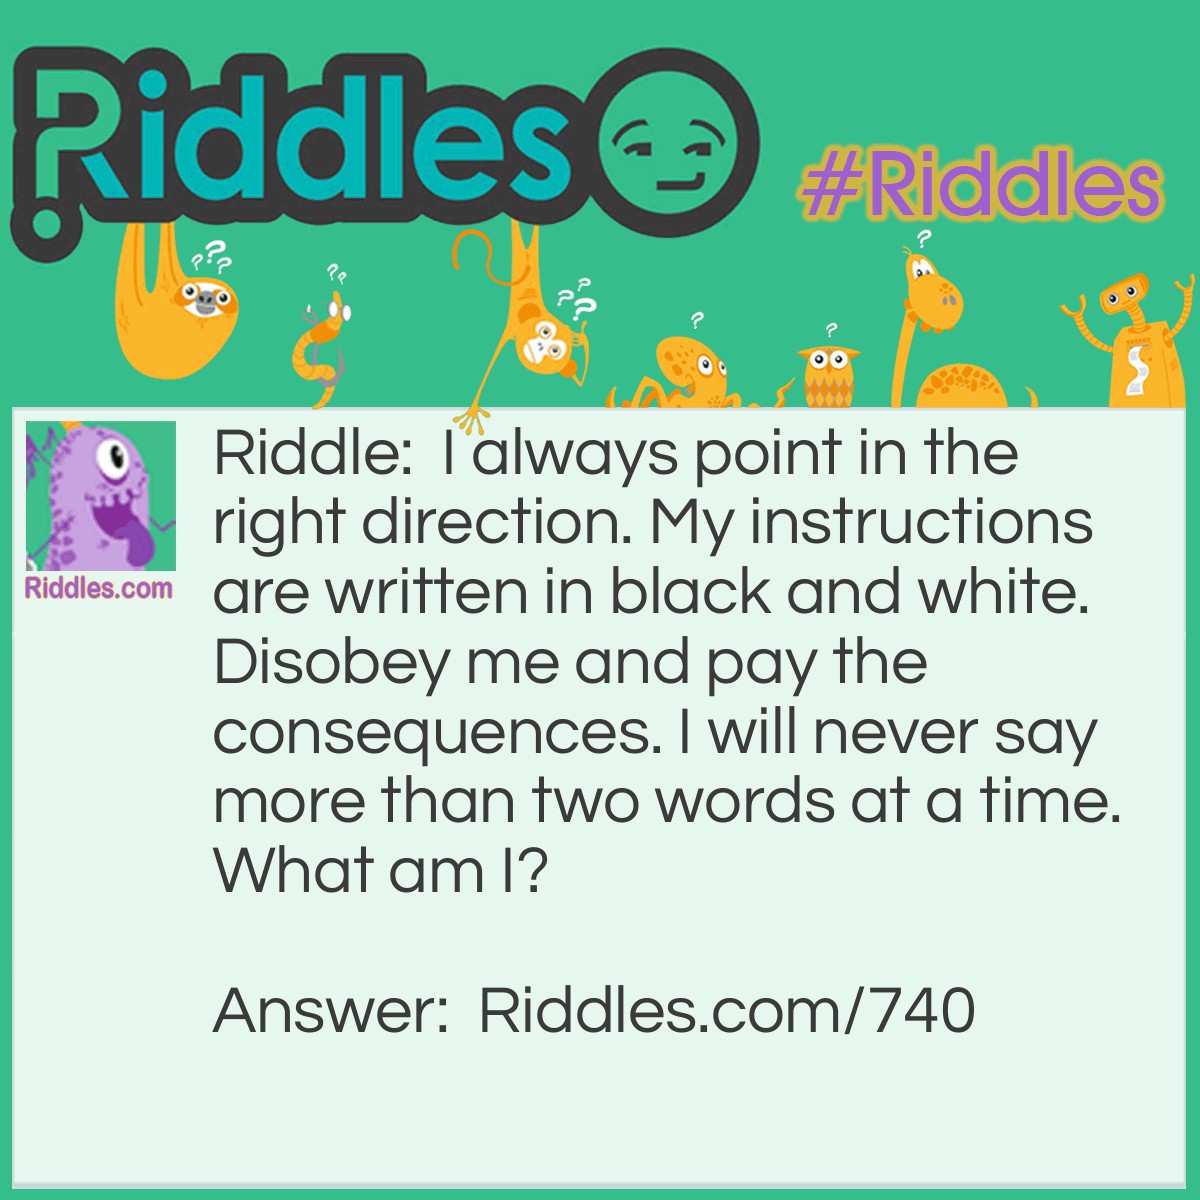 Riddle: I always point in the right direction. My instructions are written in black and white. Disobey me and pay the consequences. I will never say more than two words at a time.
What am I? Answer: A "One Way" sign!